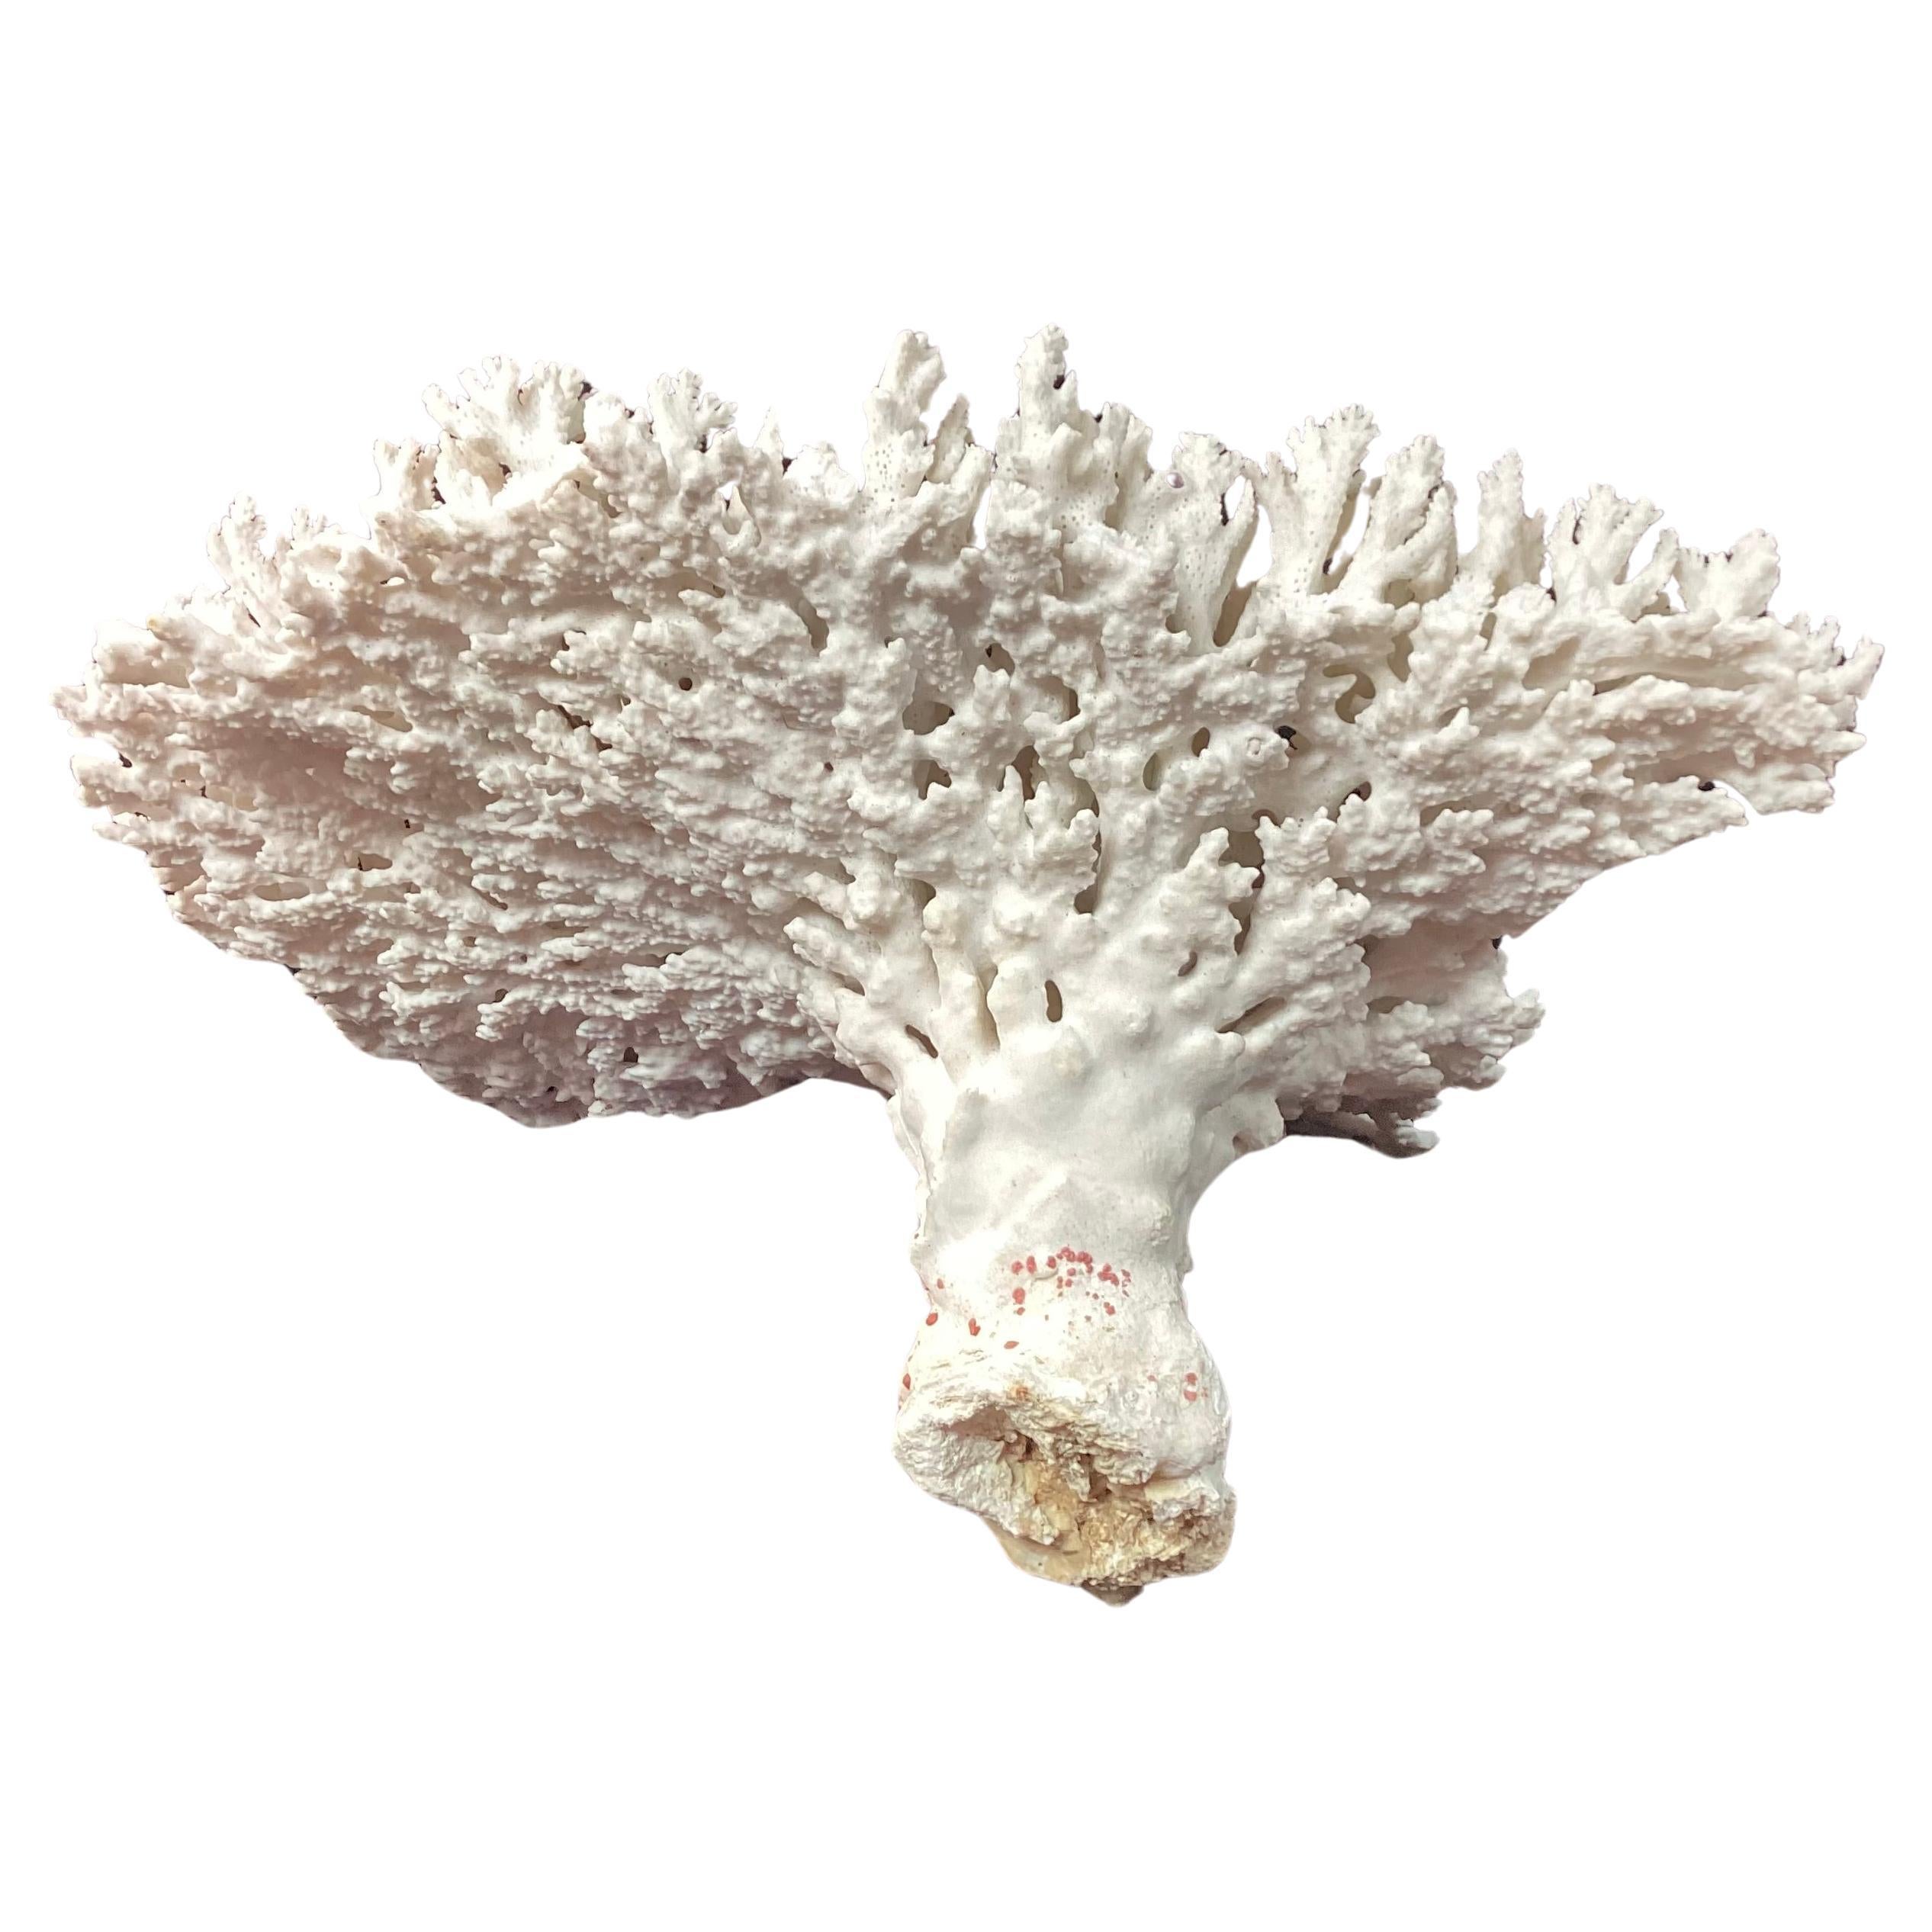 Organic Modern Natural White Coral Reef Specimen     #3 For Sale